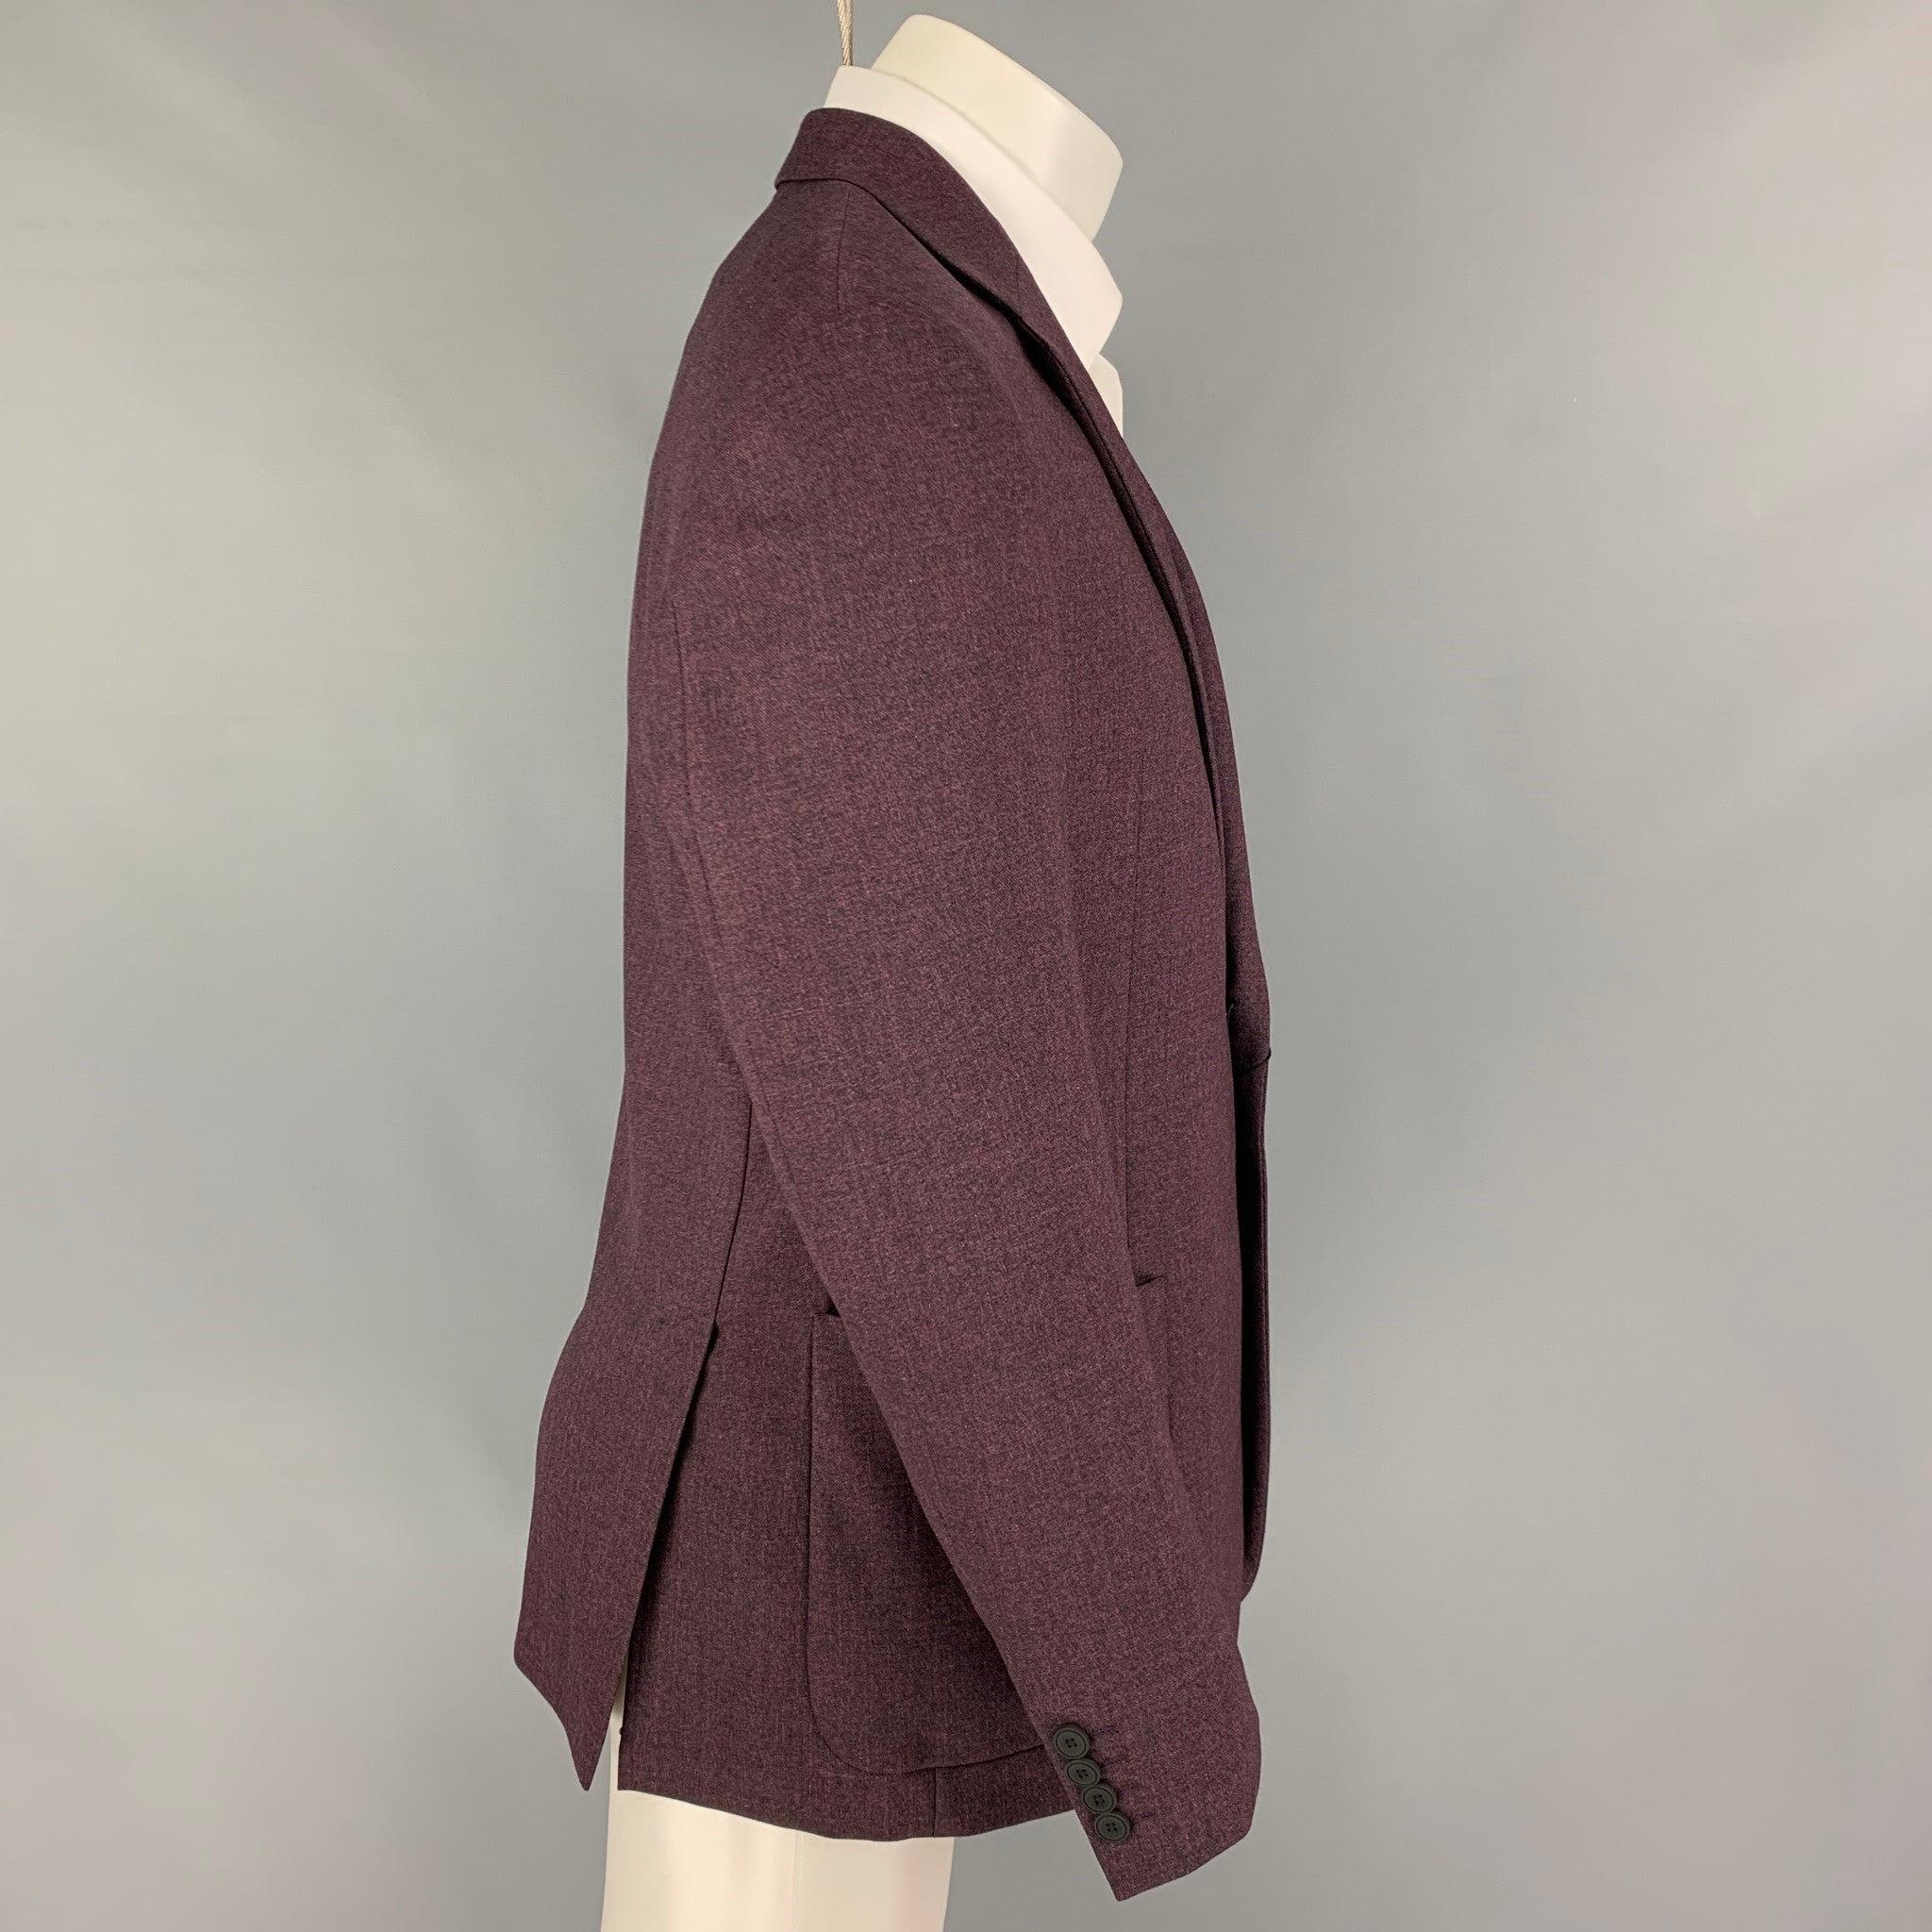 EMPORIO ARMANI sport coat comes in a purple heather wool with a half liner featuring a notch lapel, patch pockets, double back vent, and a double button closure.
New with tags.
 

Marked:   50 

Measurements: 
 
Shoulder: 18 inches  Chest: 40 inches